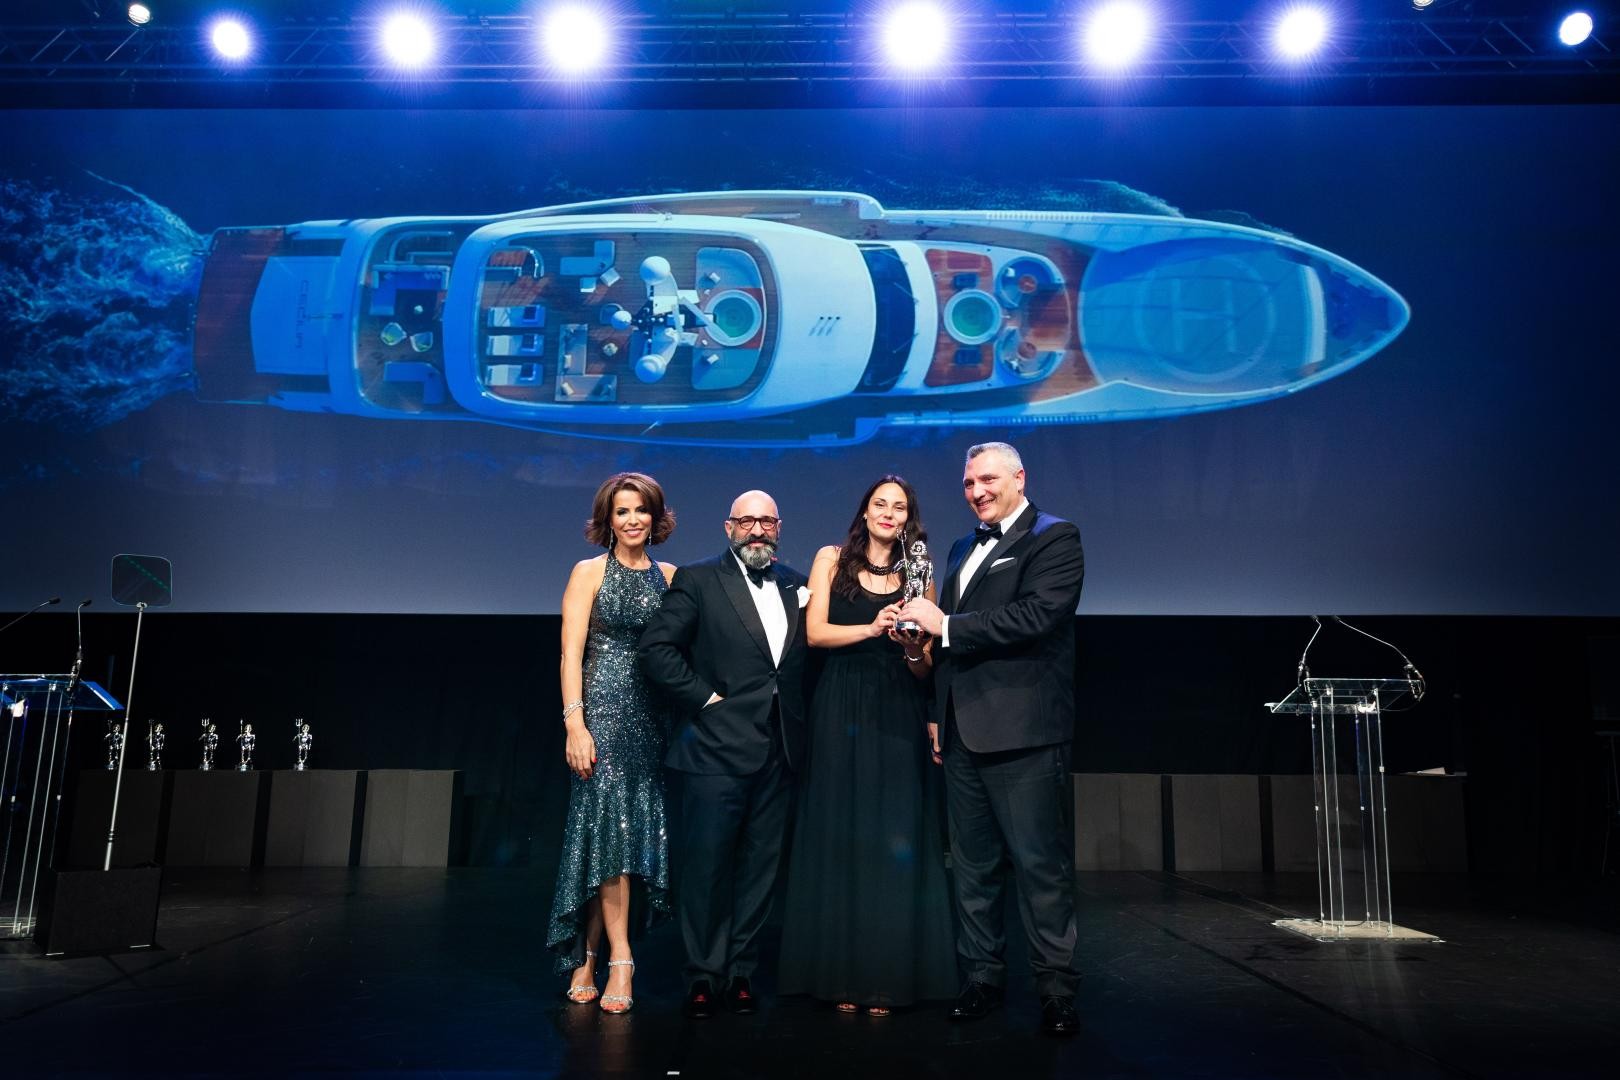 Wider 165 triumphs at the World Superyachts Awards 2019